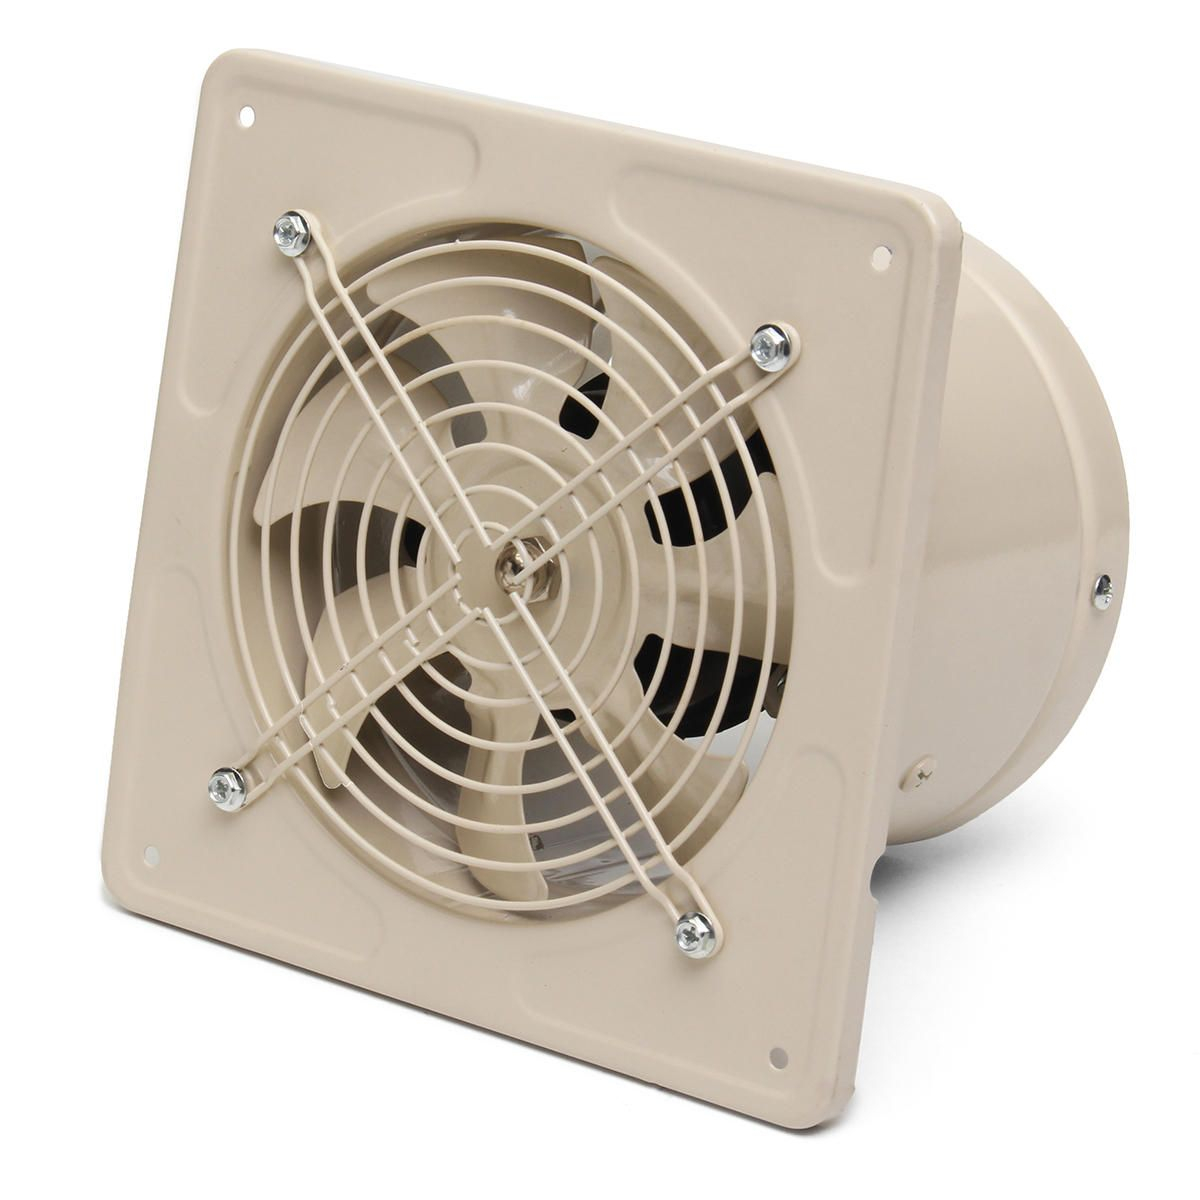 220v 40w Ventilation Fan 6 Inch Wall Mounted Window Exhaust throughout sizing 1200 X 1200